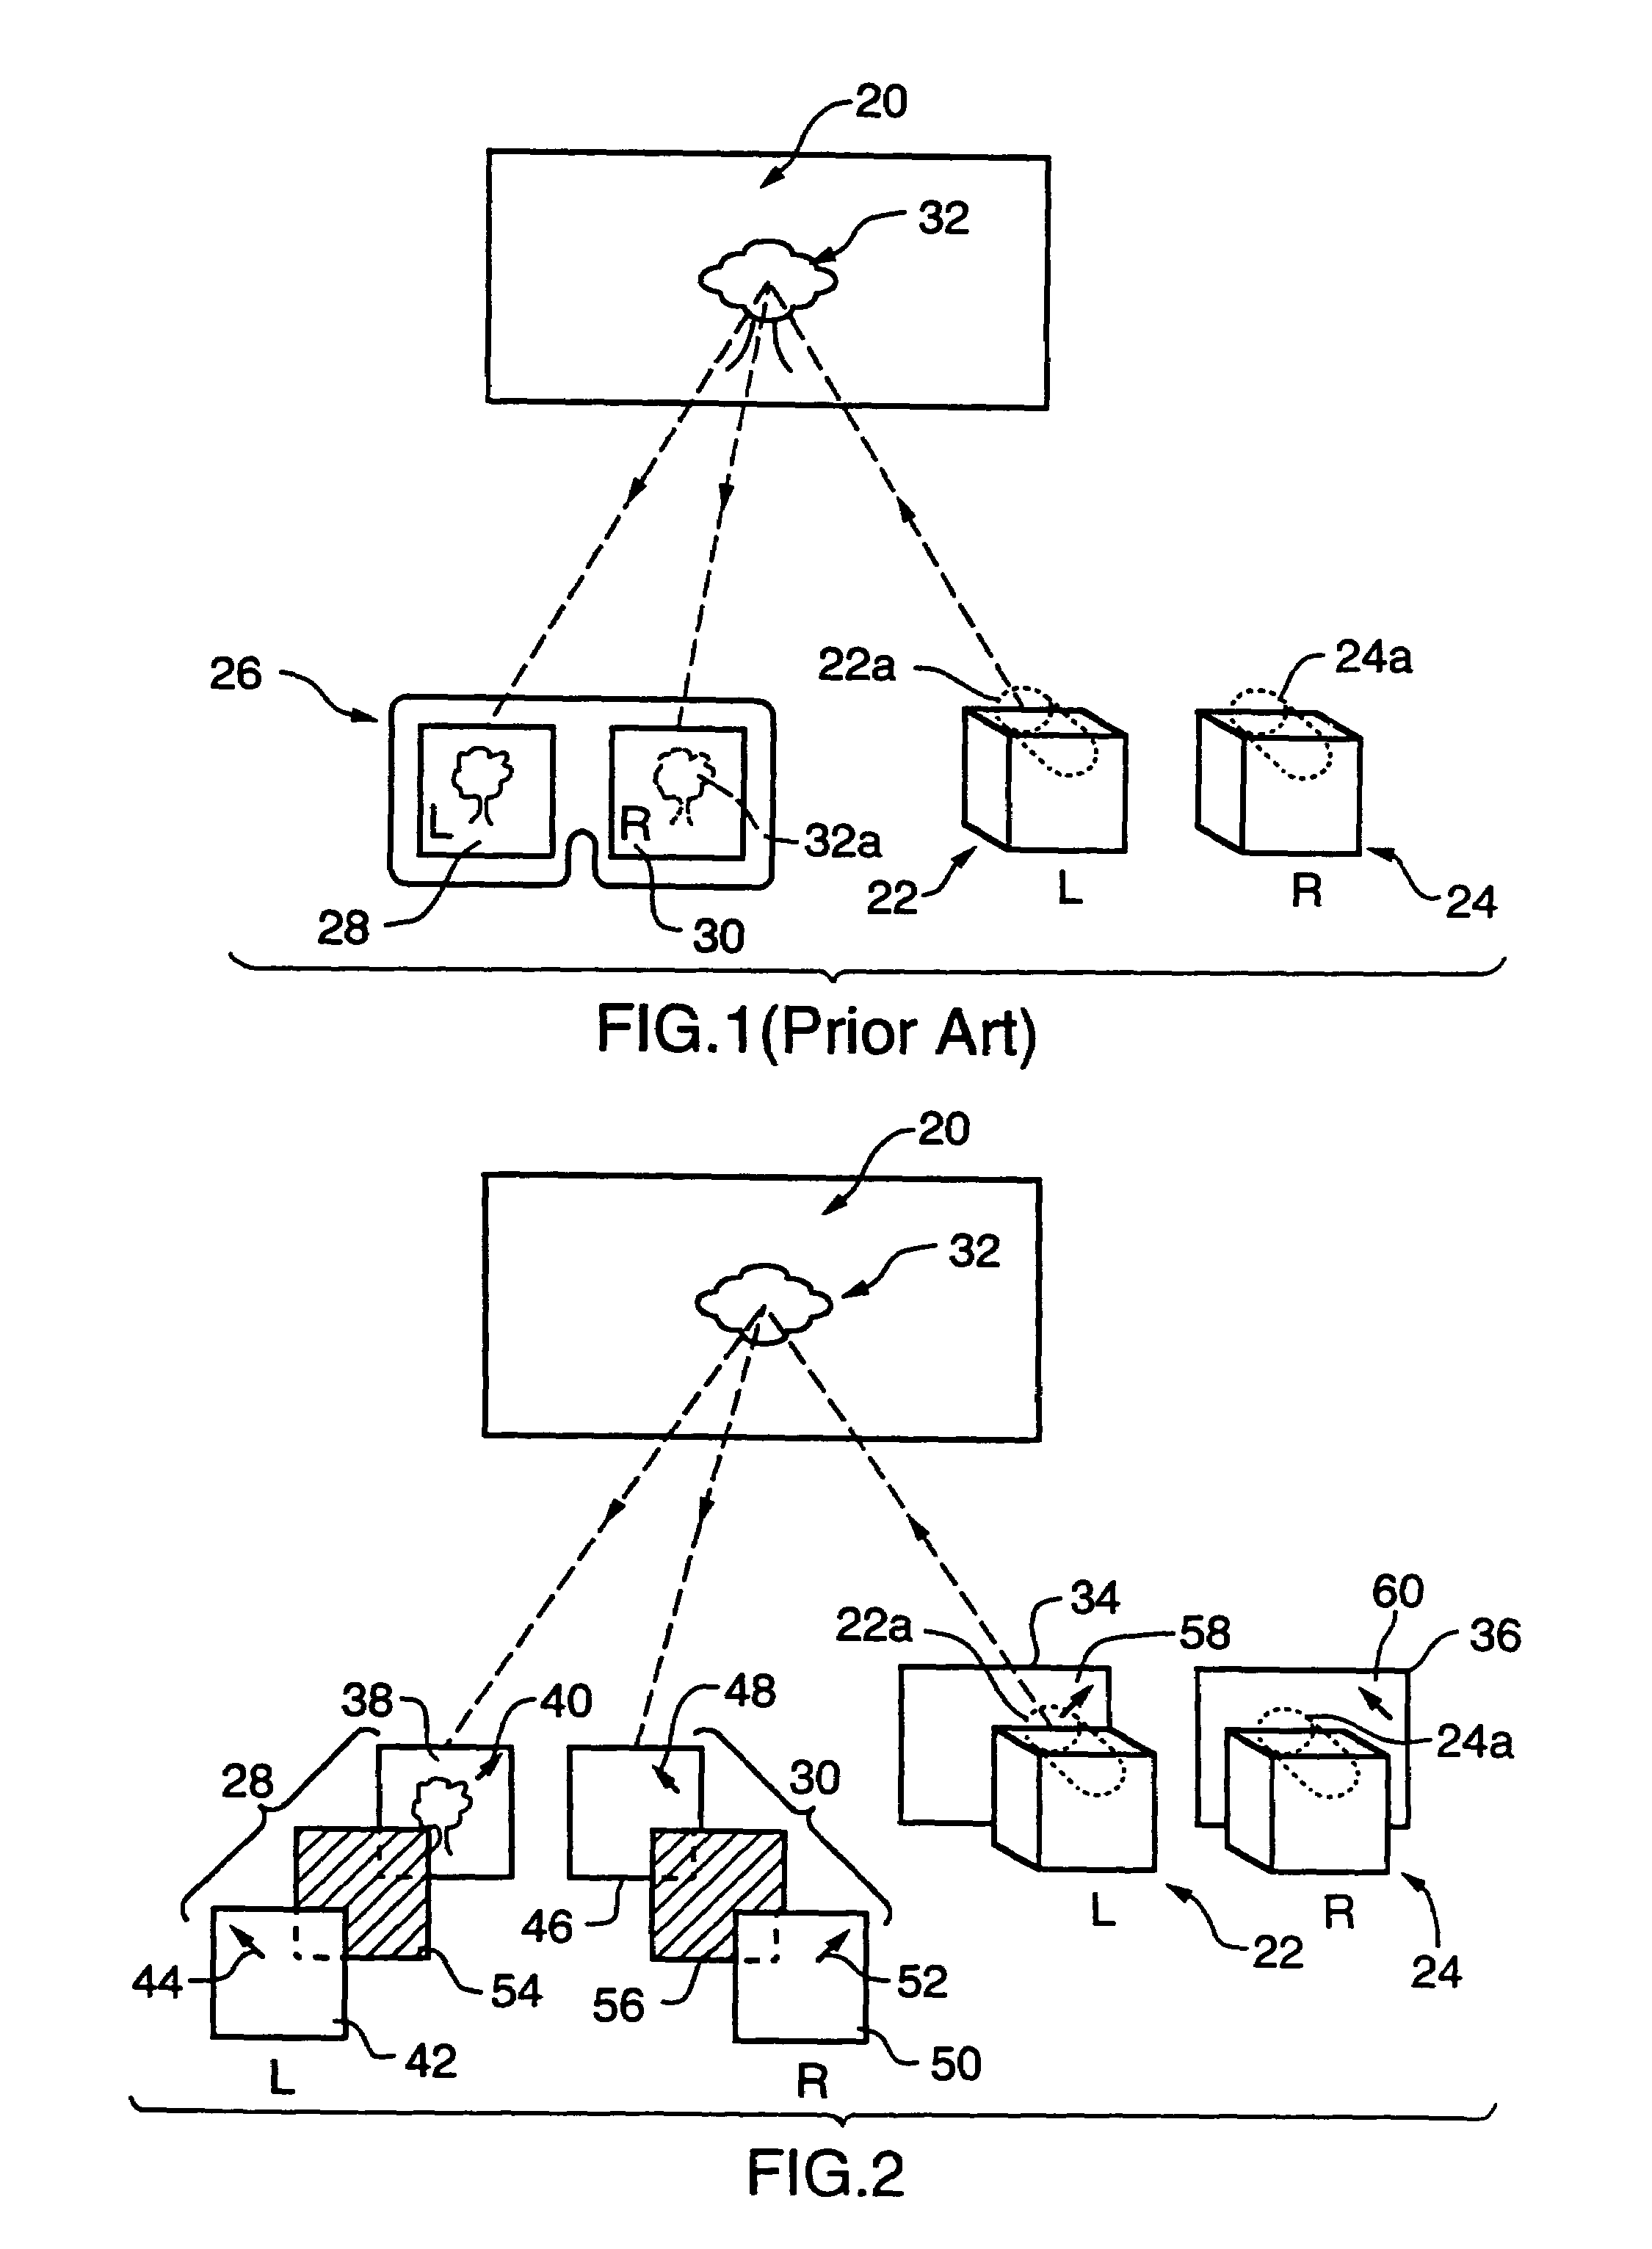 Method and apparatus for presenting stereoscopic images